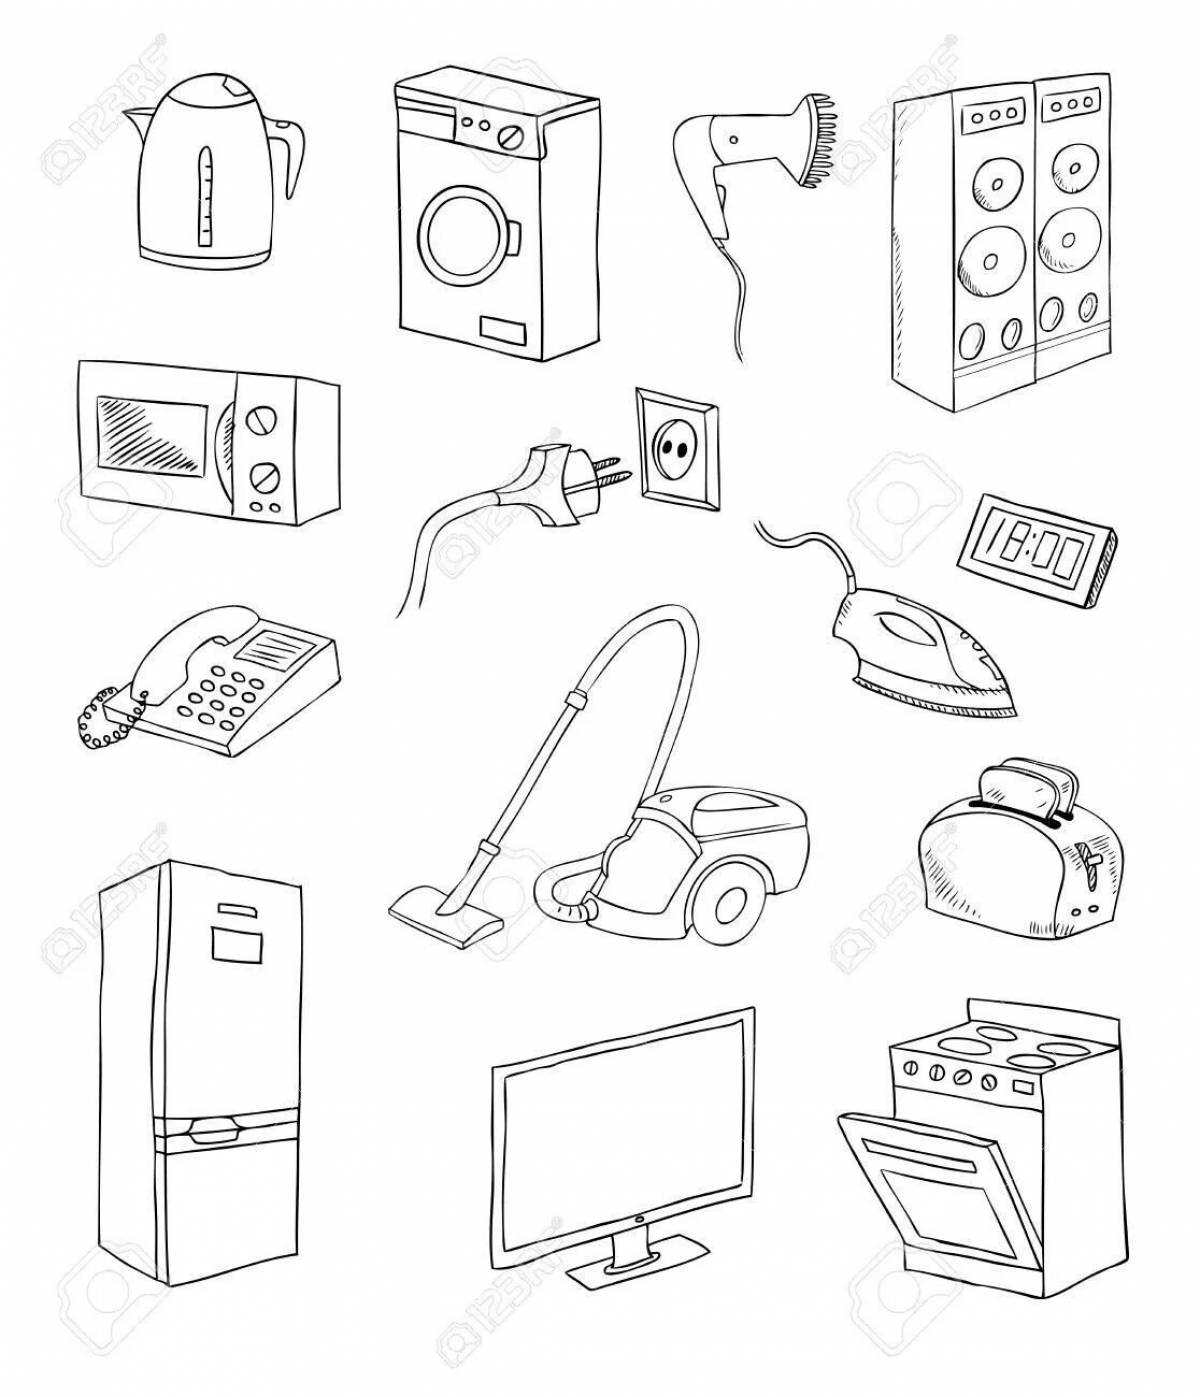 Coloring page gorgeous furniture and household appliances